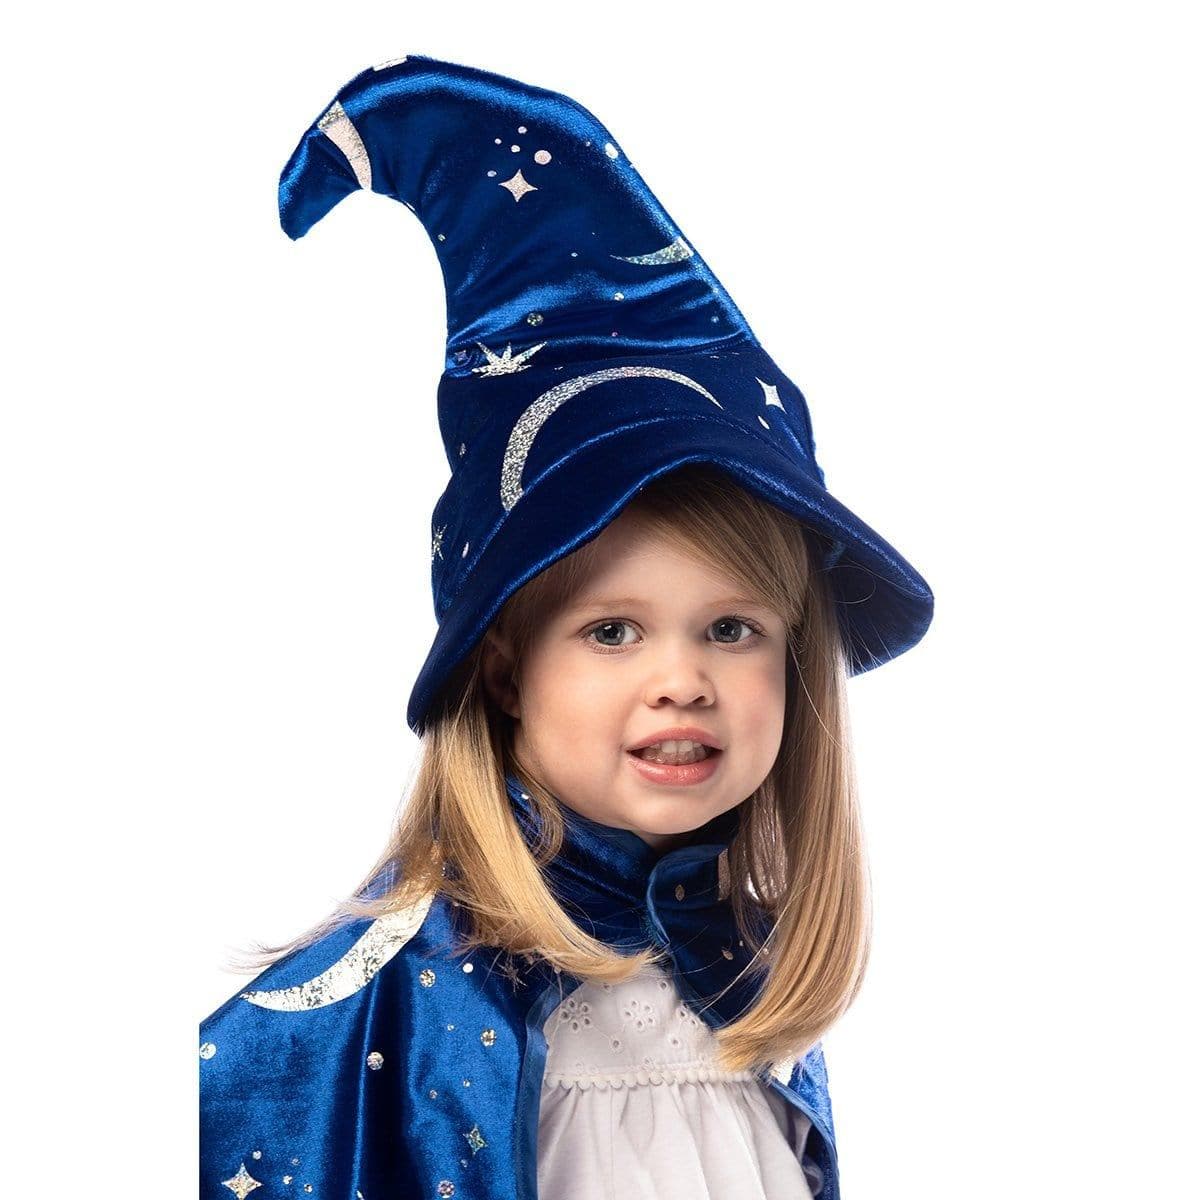 Buy Costume Accessories Wizard hat for kids sold at Party Expert